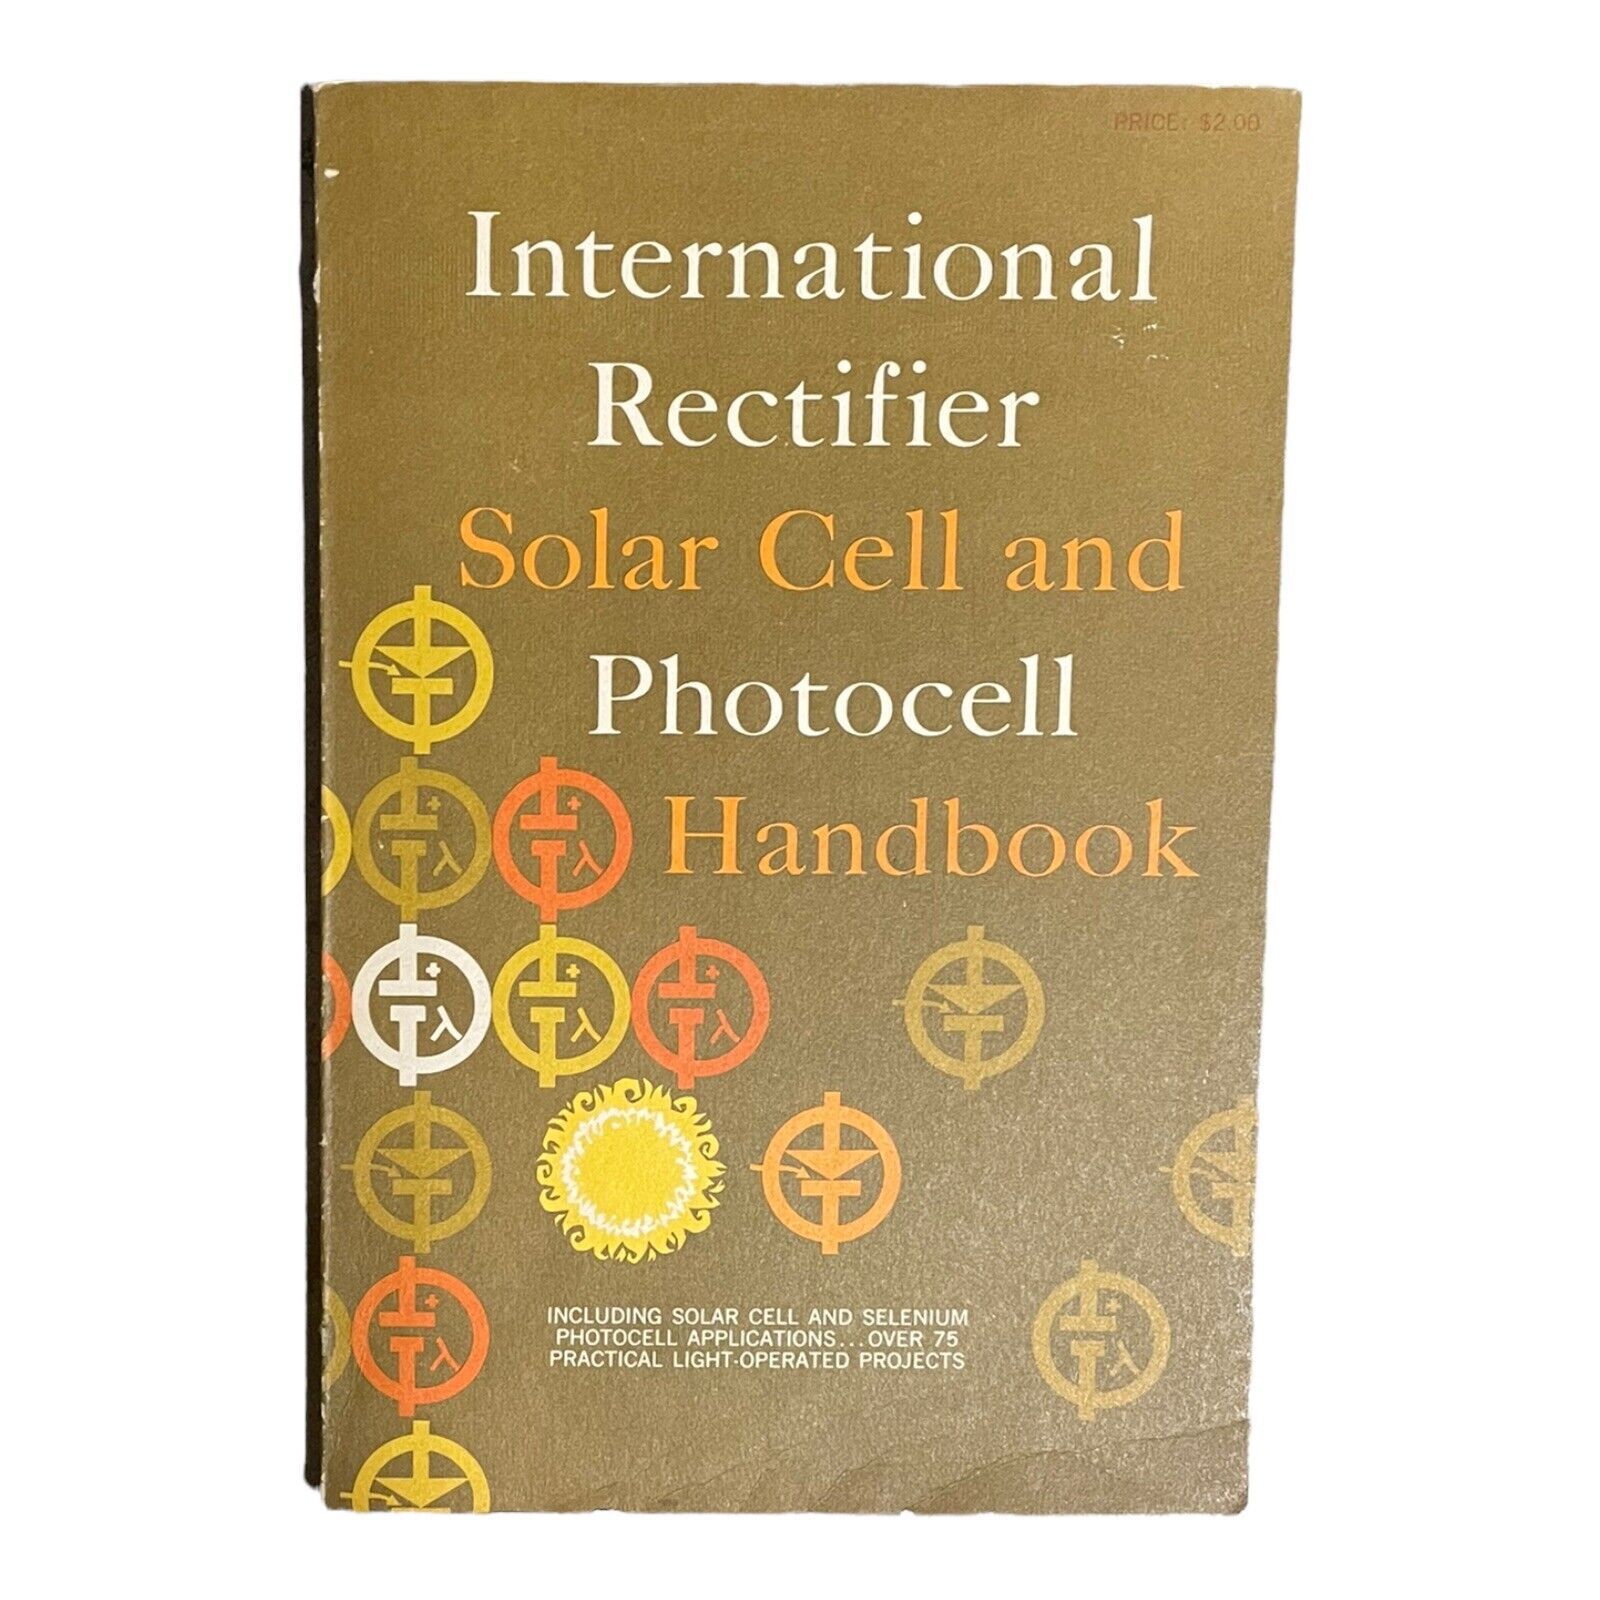 International Rectifier Solar Cell and Photocell Handbook 75 Projects Selenium